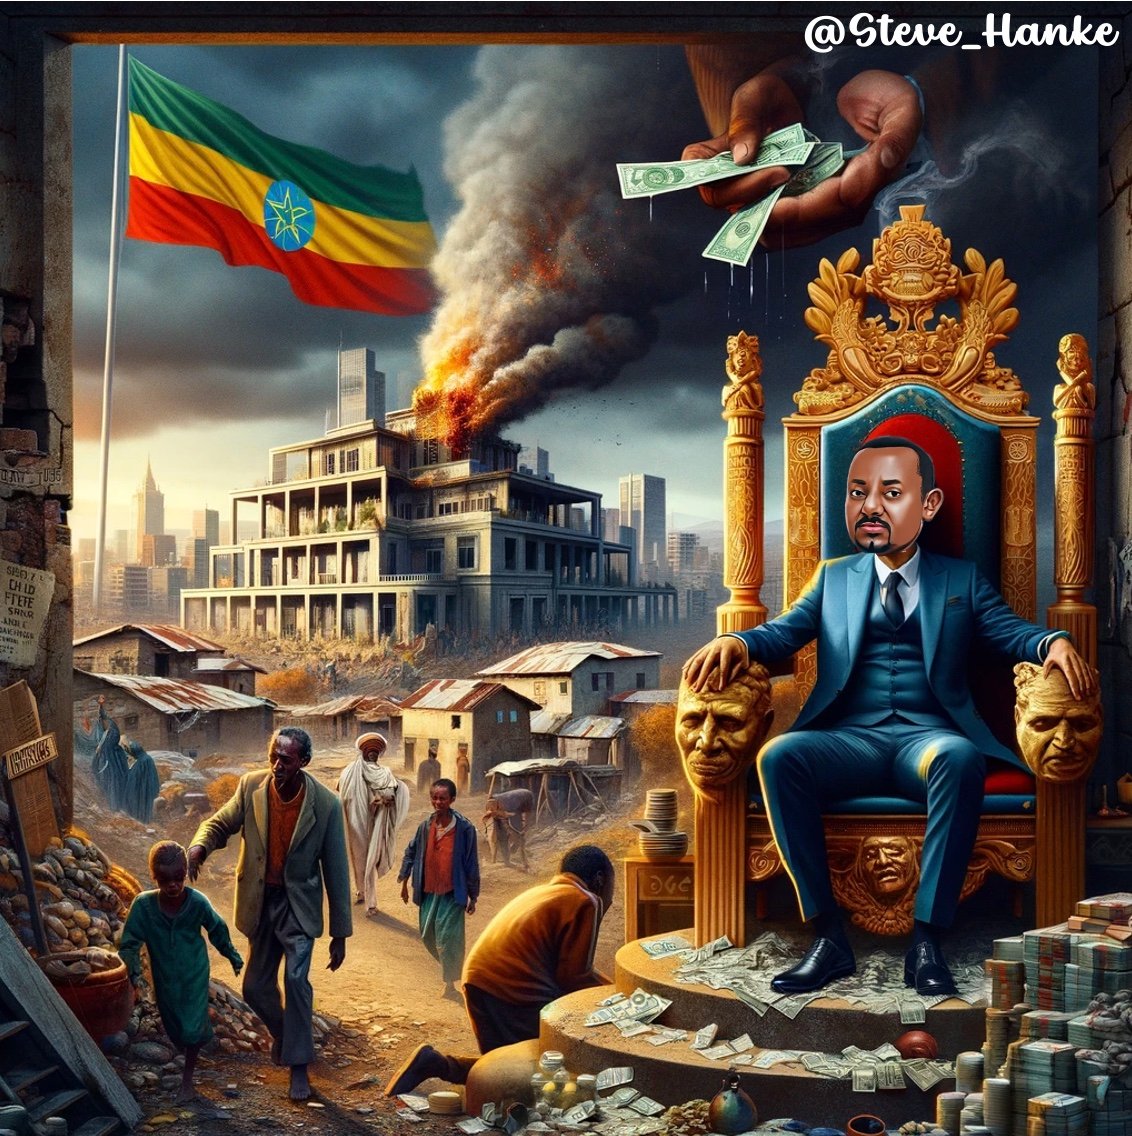 #EthiopiaWatch🇪🇹: The @UN has secured over $600MM in aid to help tackle Ethiopia's humanitarian crisis. PM ABIY AHMED'S ECONOMIC INCOMPETENCE = HUMANITARIAN CRISIS.